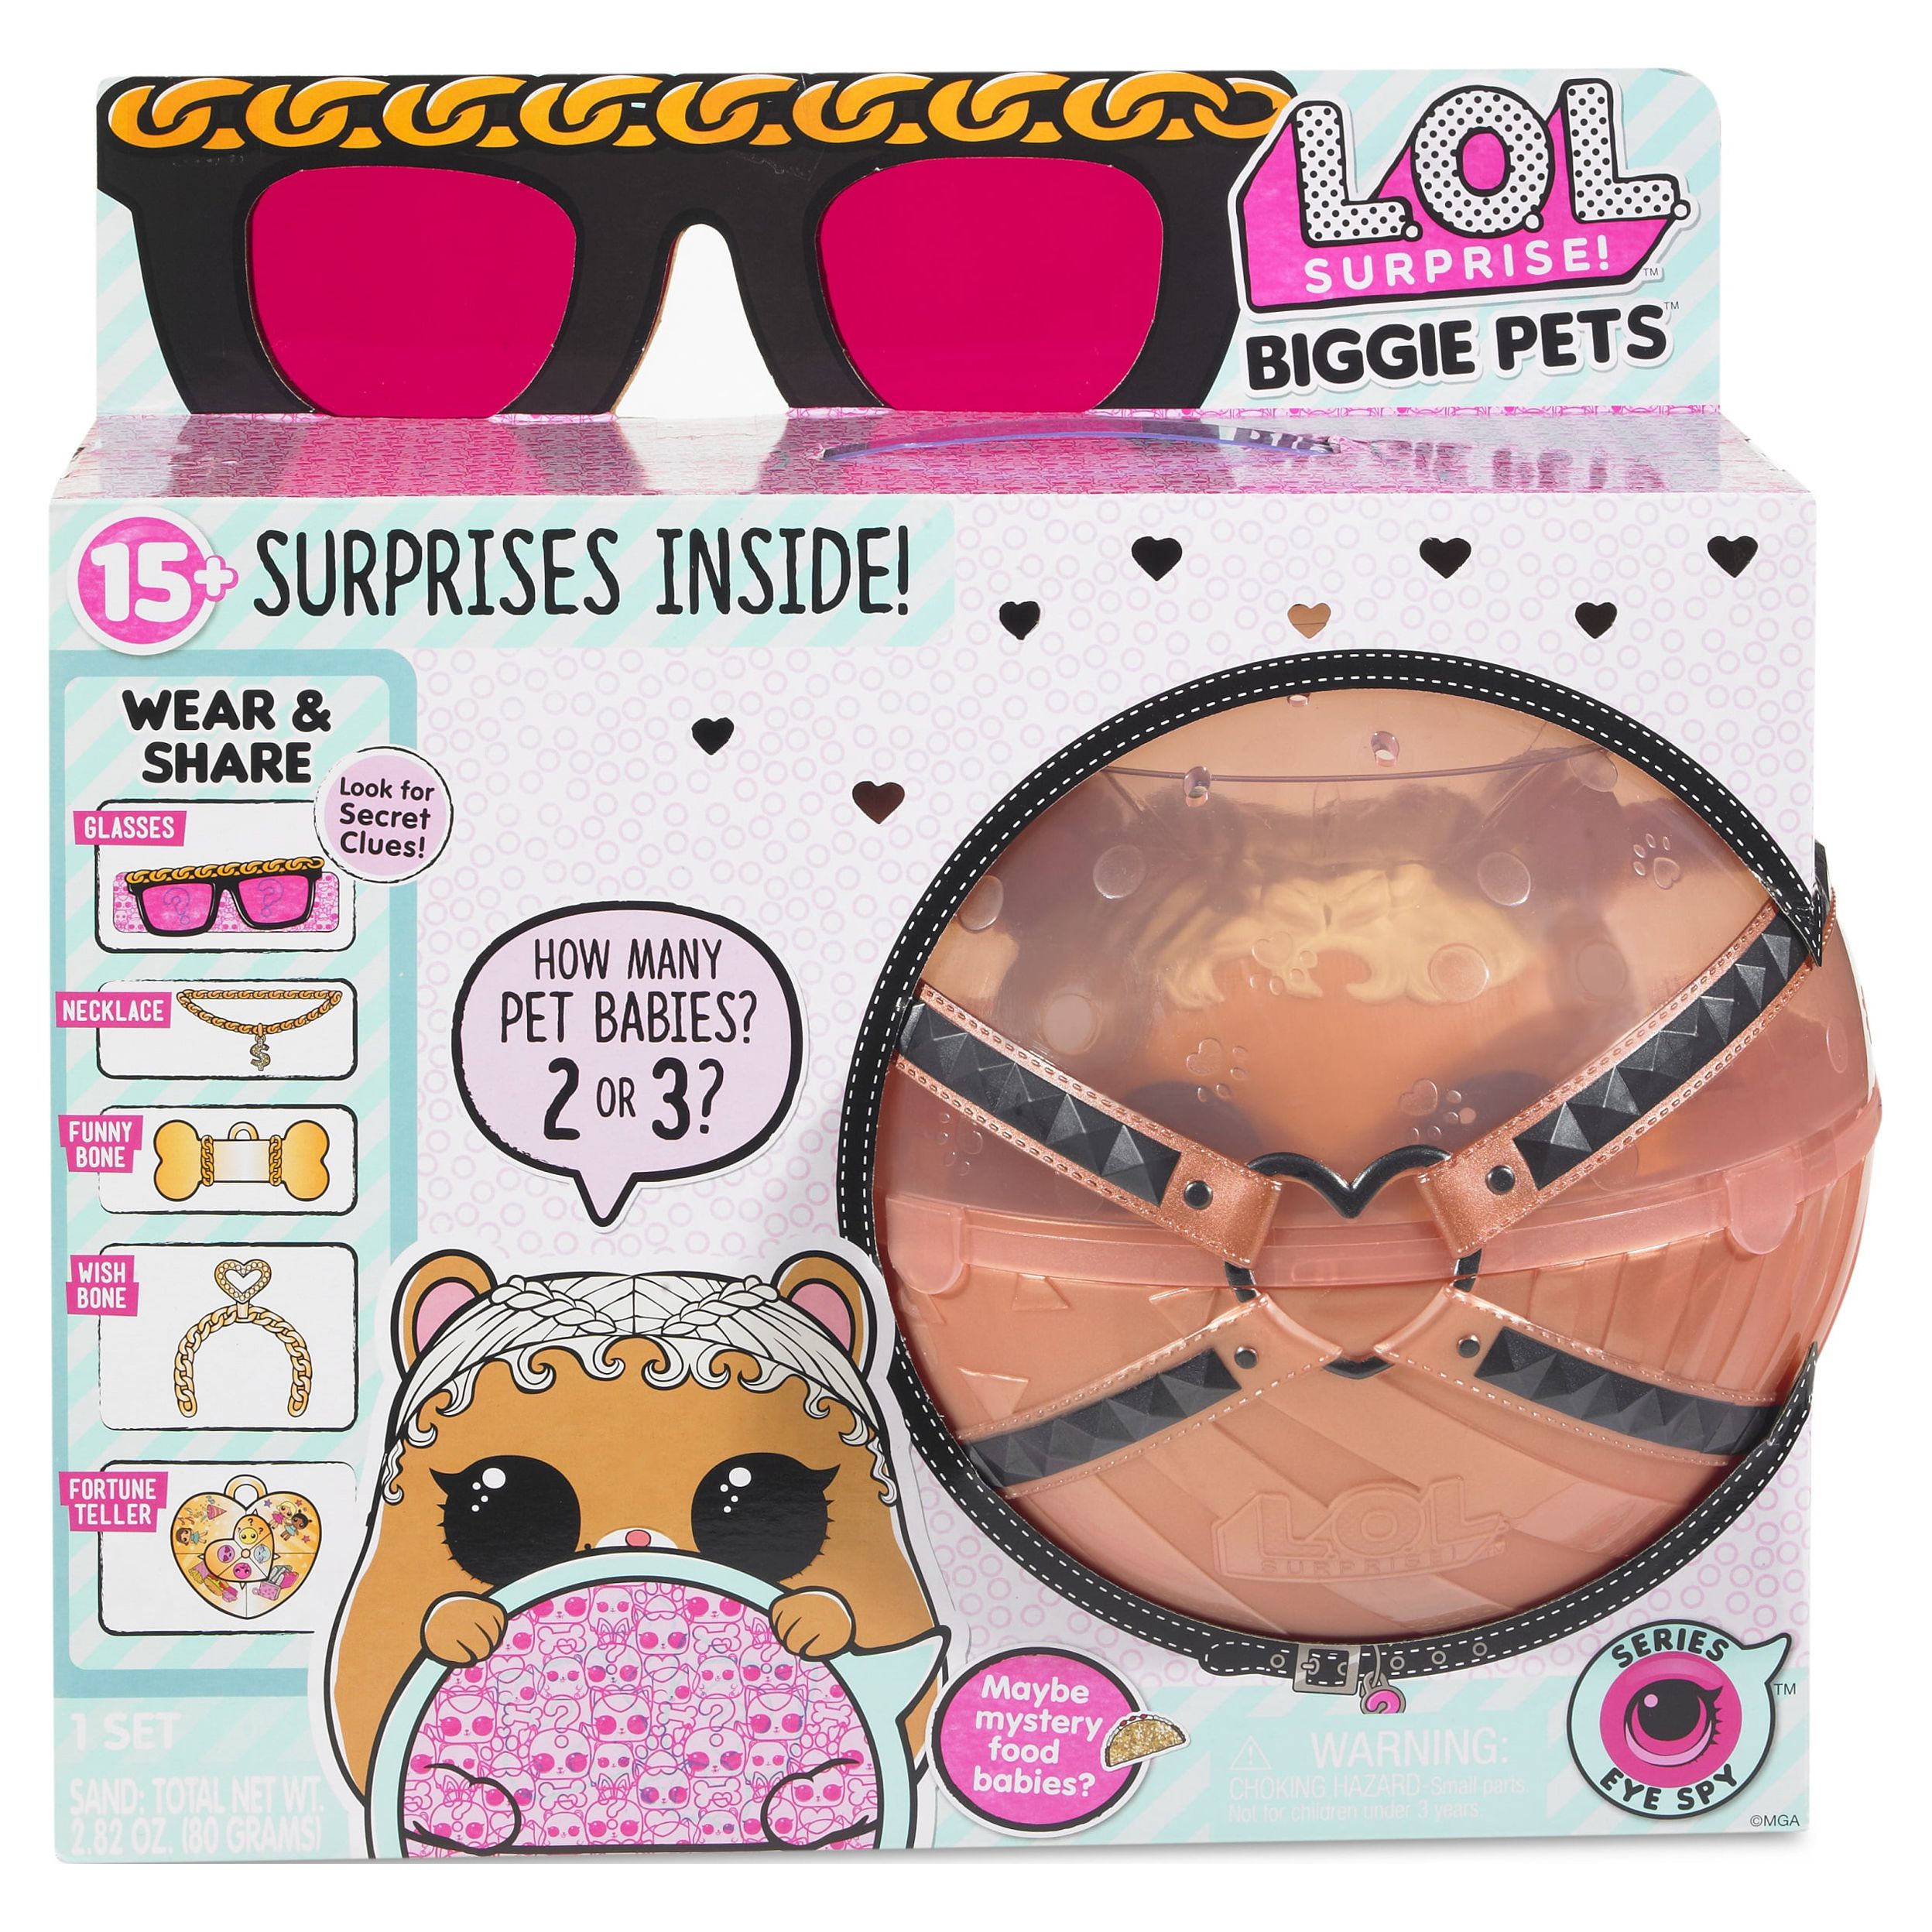 LOL Surprise Biggie Pets - M.C.Hammy Mini Backpack & Accessories, Great Gift for Kids Ages 4 5 6+ - image 3 of 5